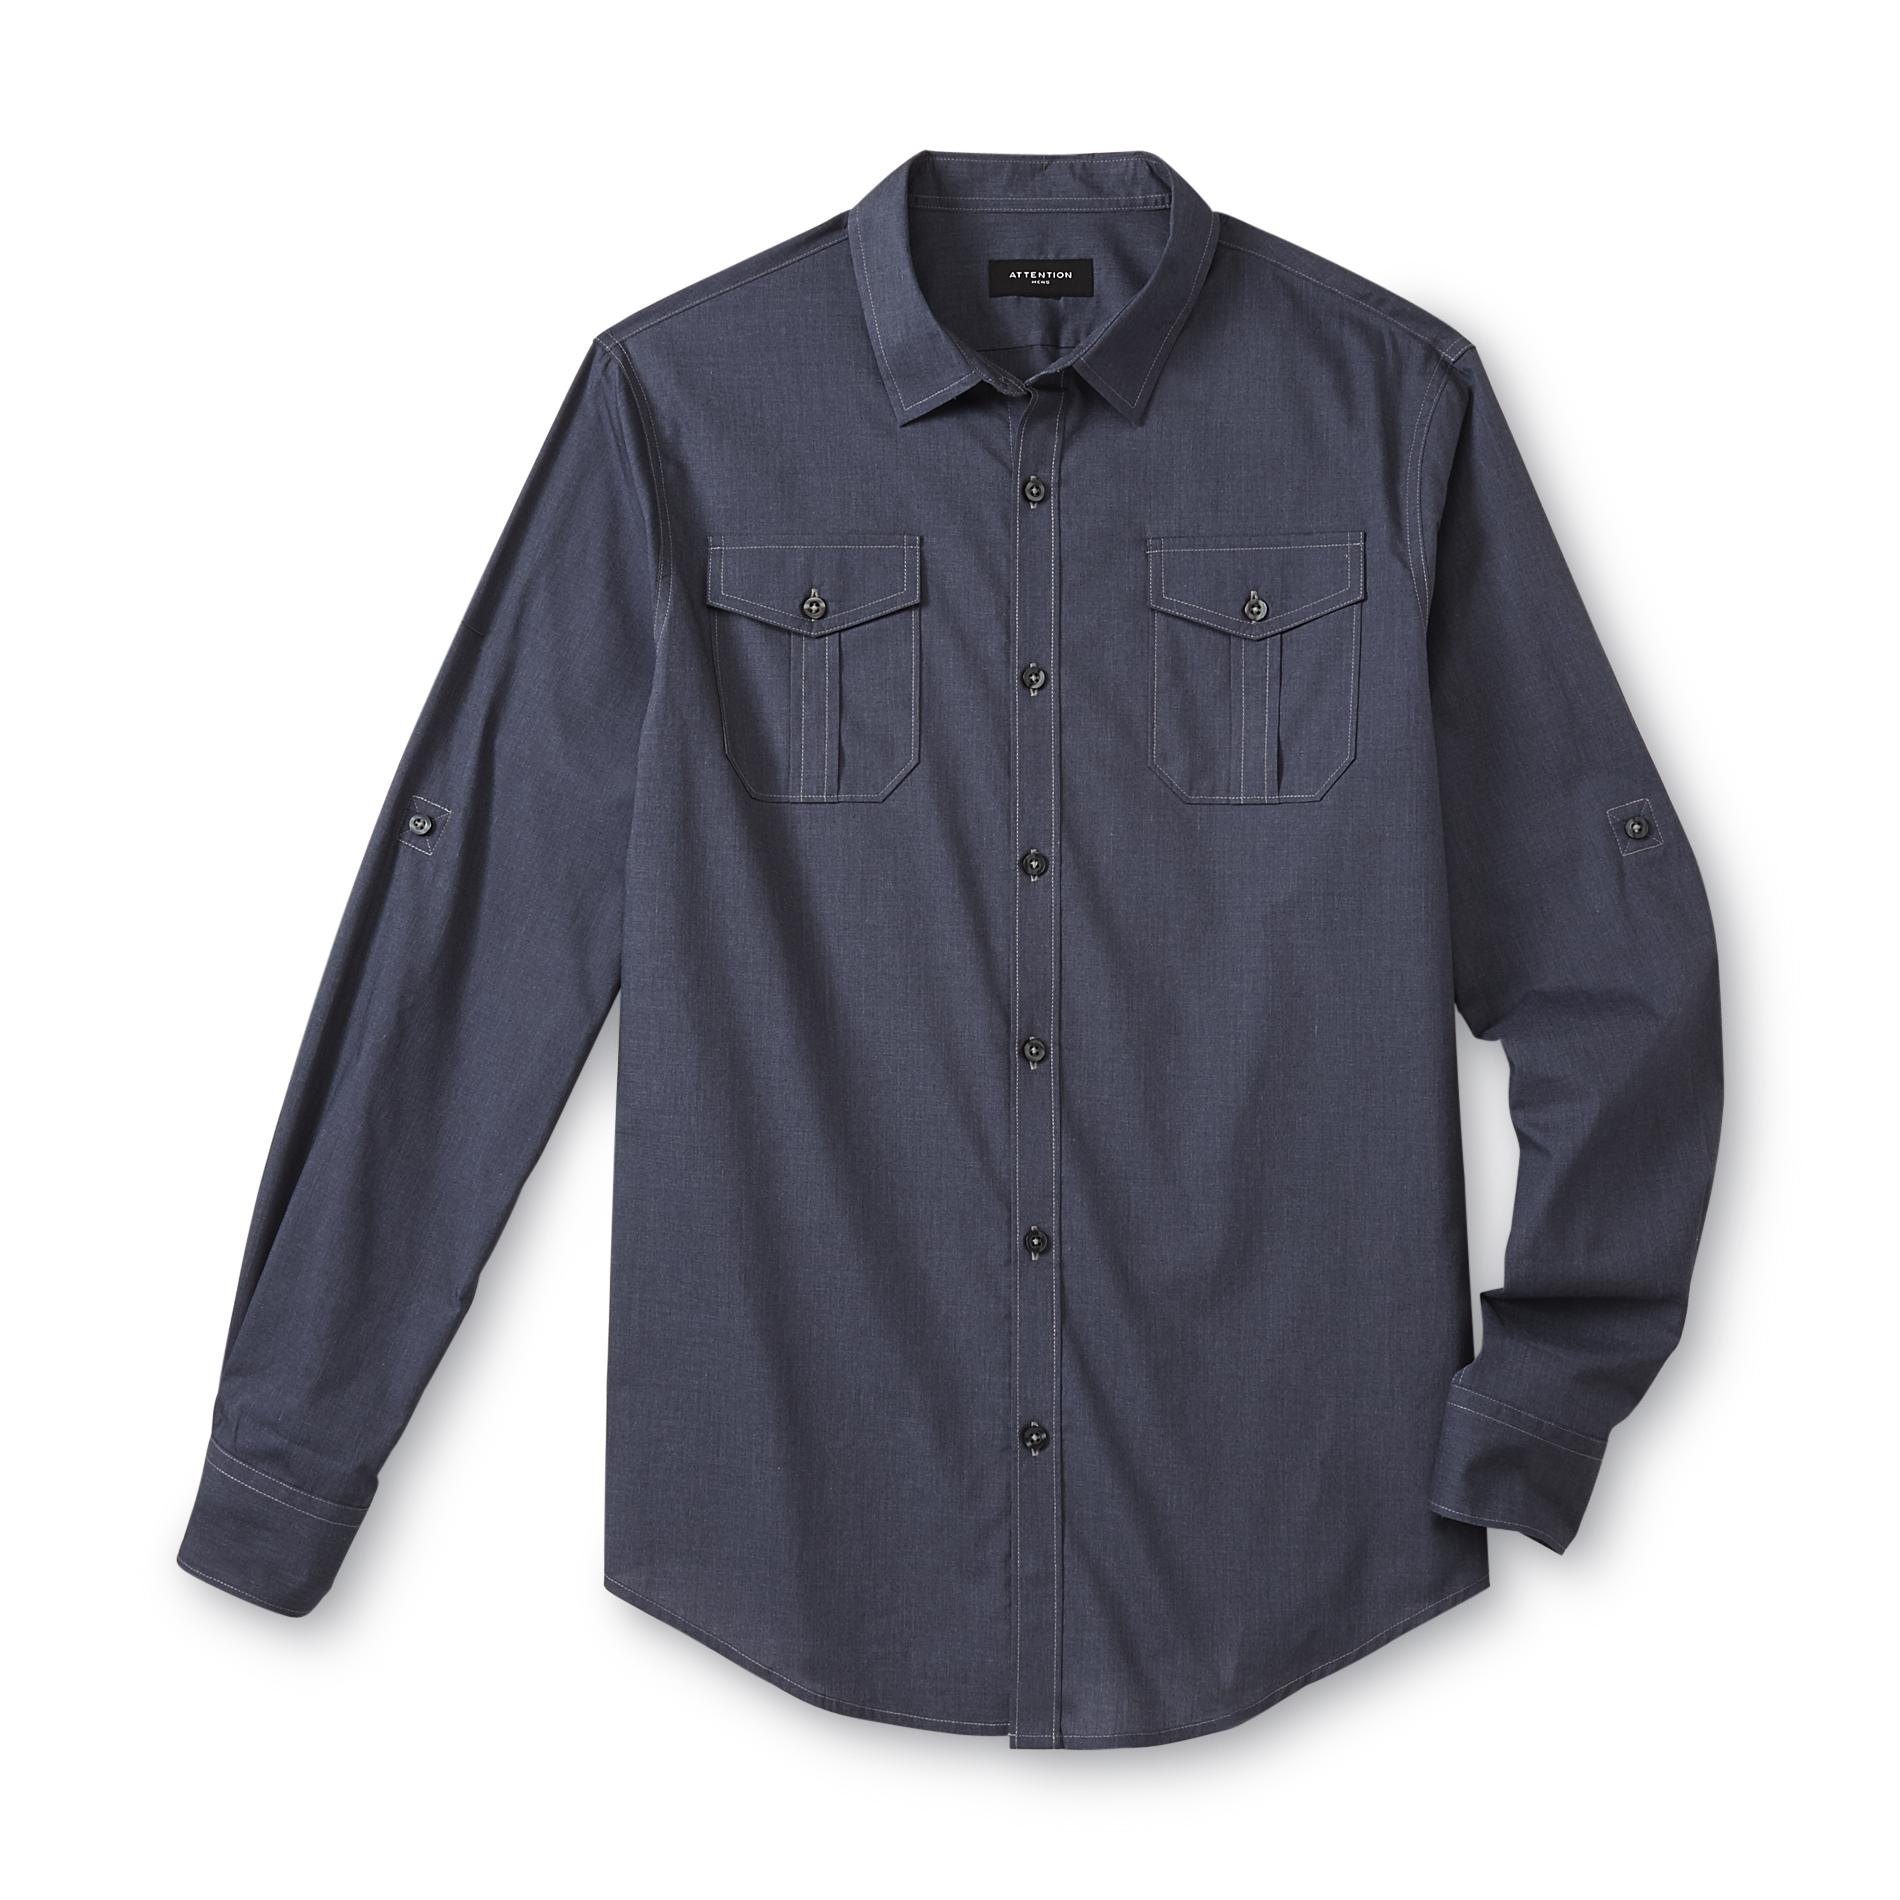 Attention Men's Collared Long-Sleeve Shirt